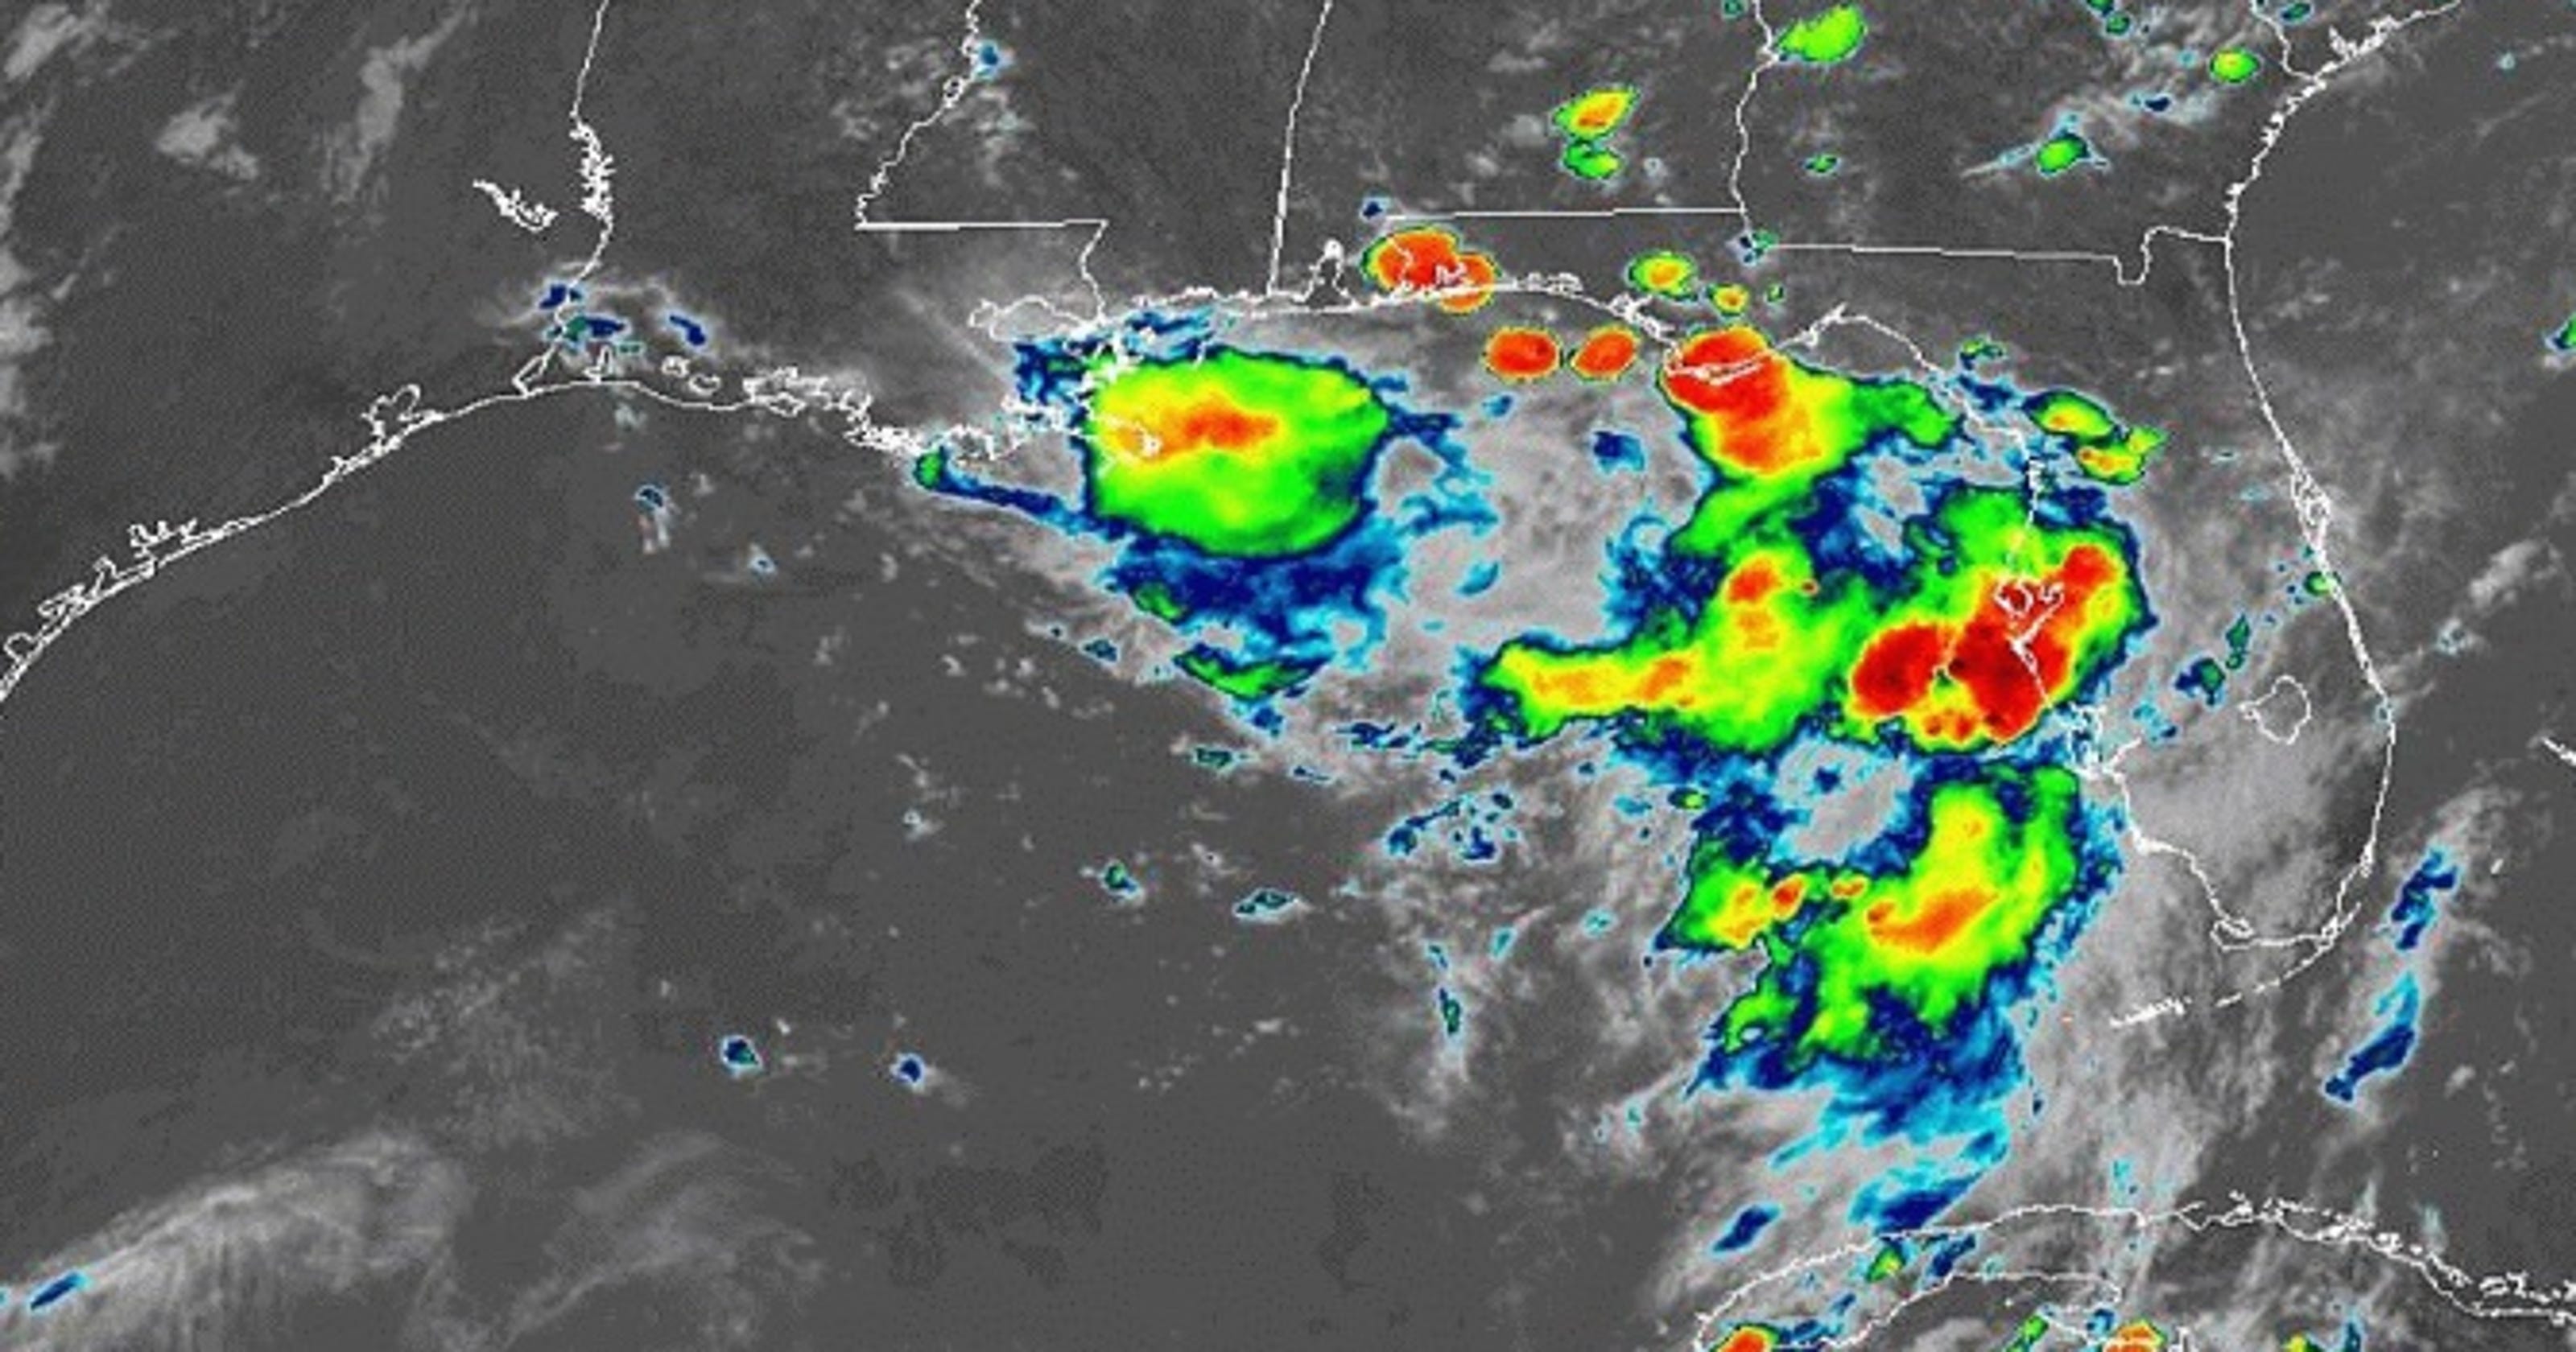 Tropical storm Depression likely over Gulf of Mexico; forecast path